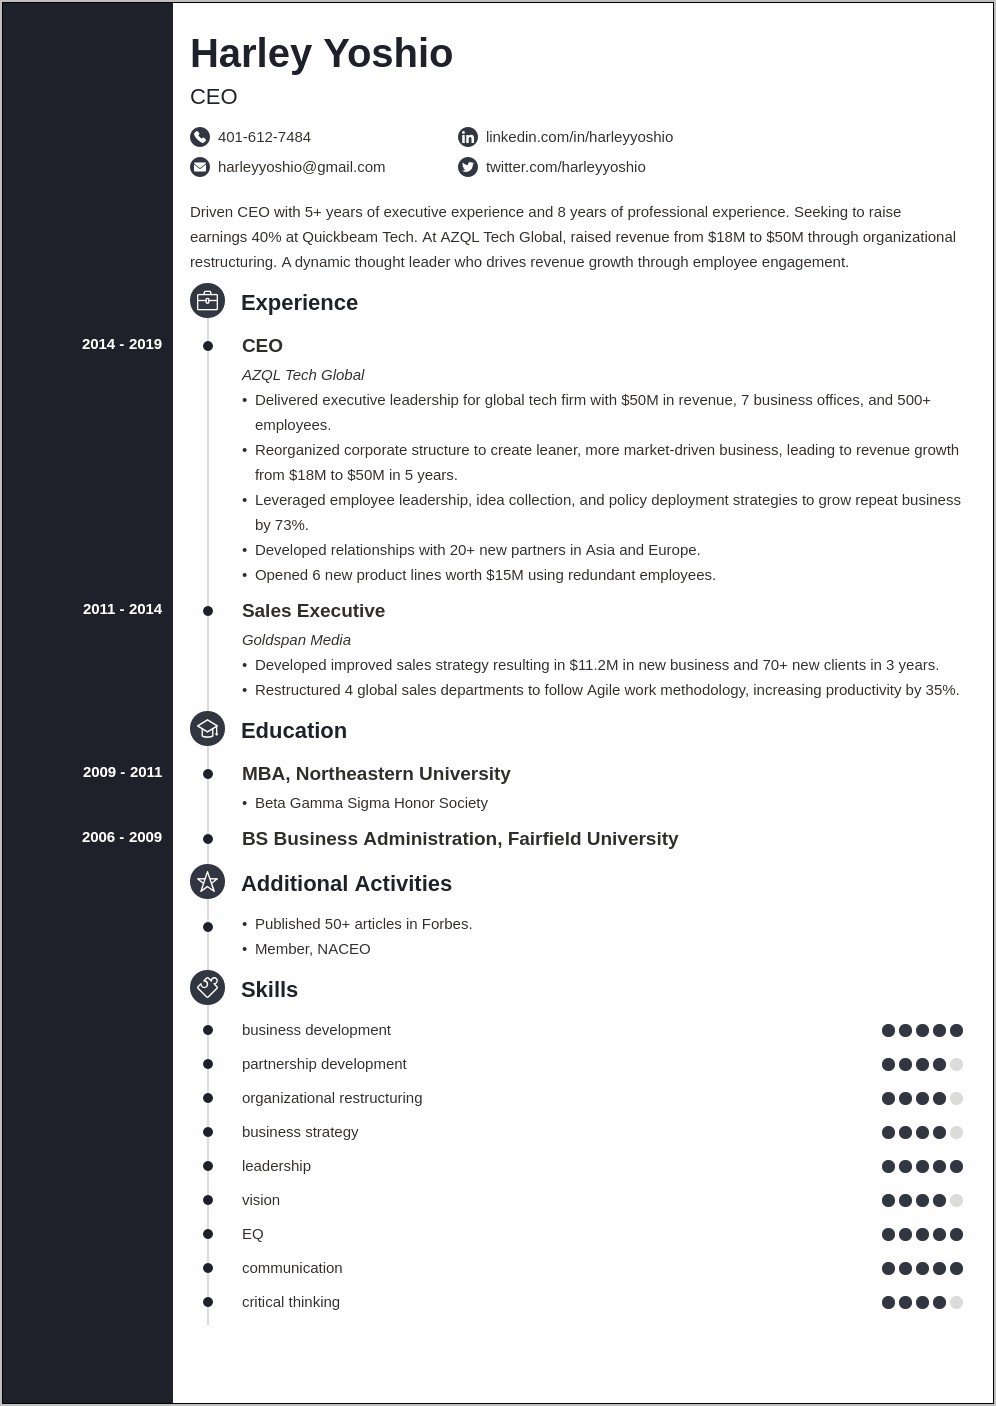 Chief Executive Officer Resume Sample